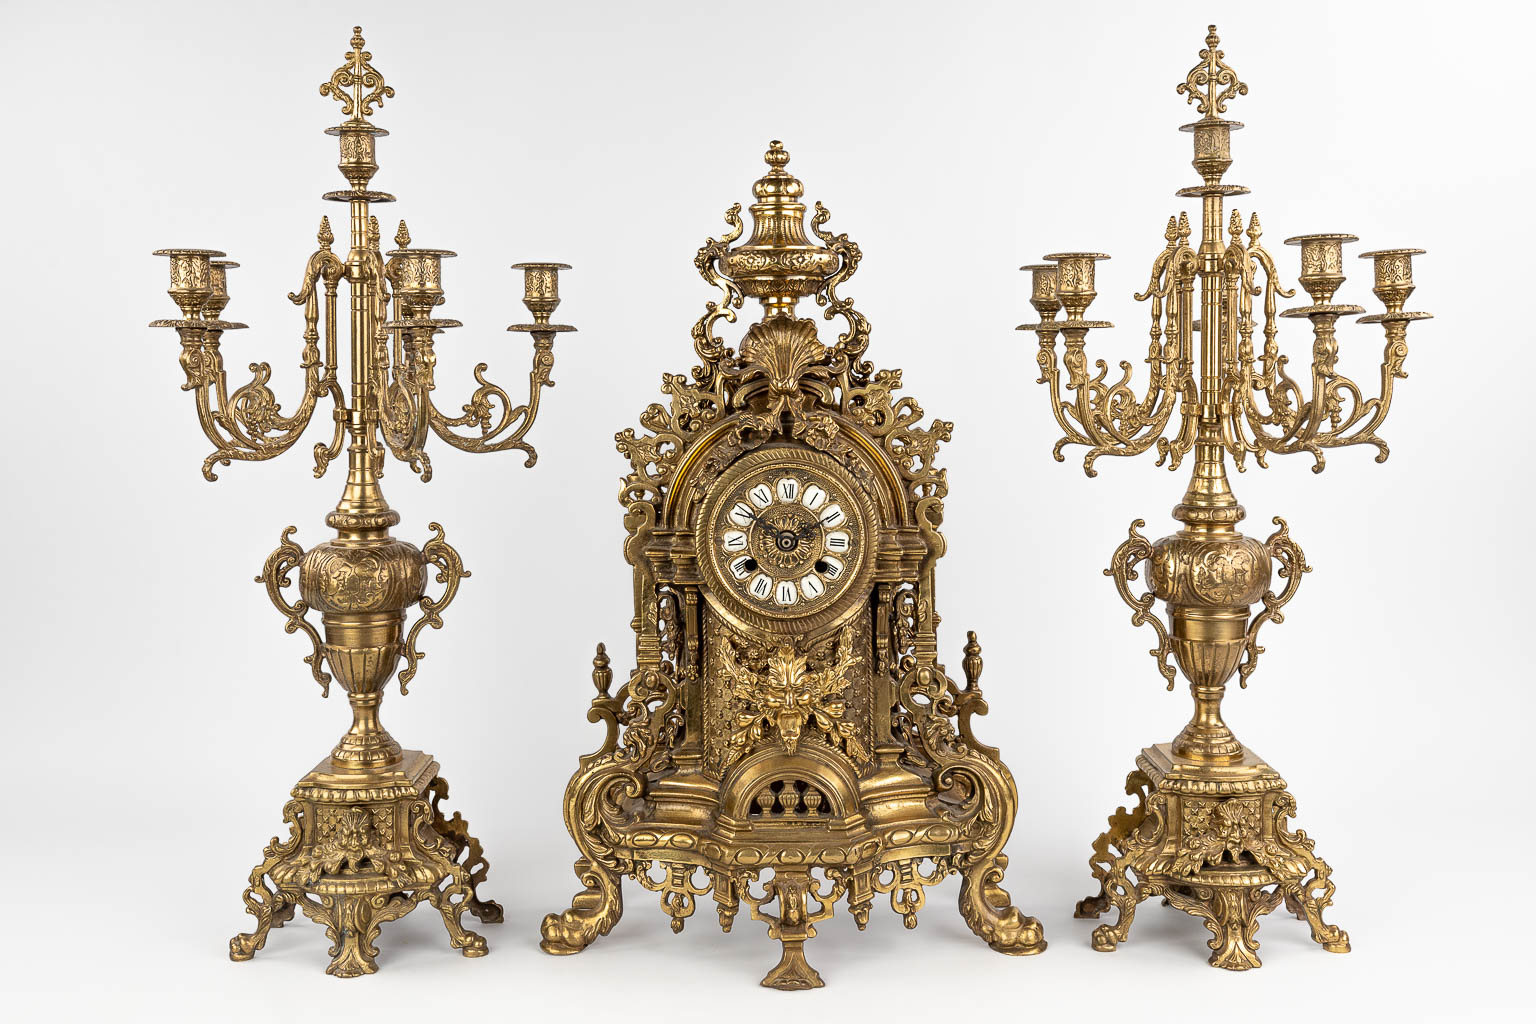 A three-piece mantle garniture consisting of a clock with candelabra, made of bronze. circa 1970. (W:36 x H:60 cm)